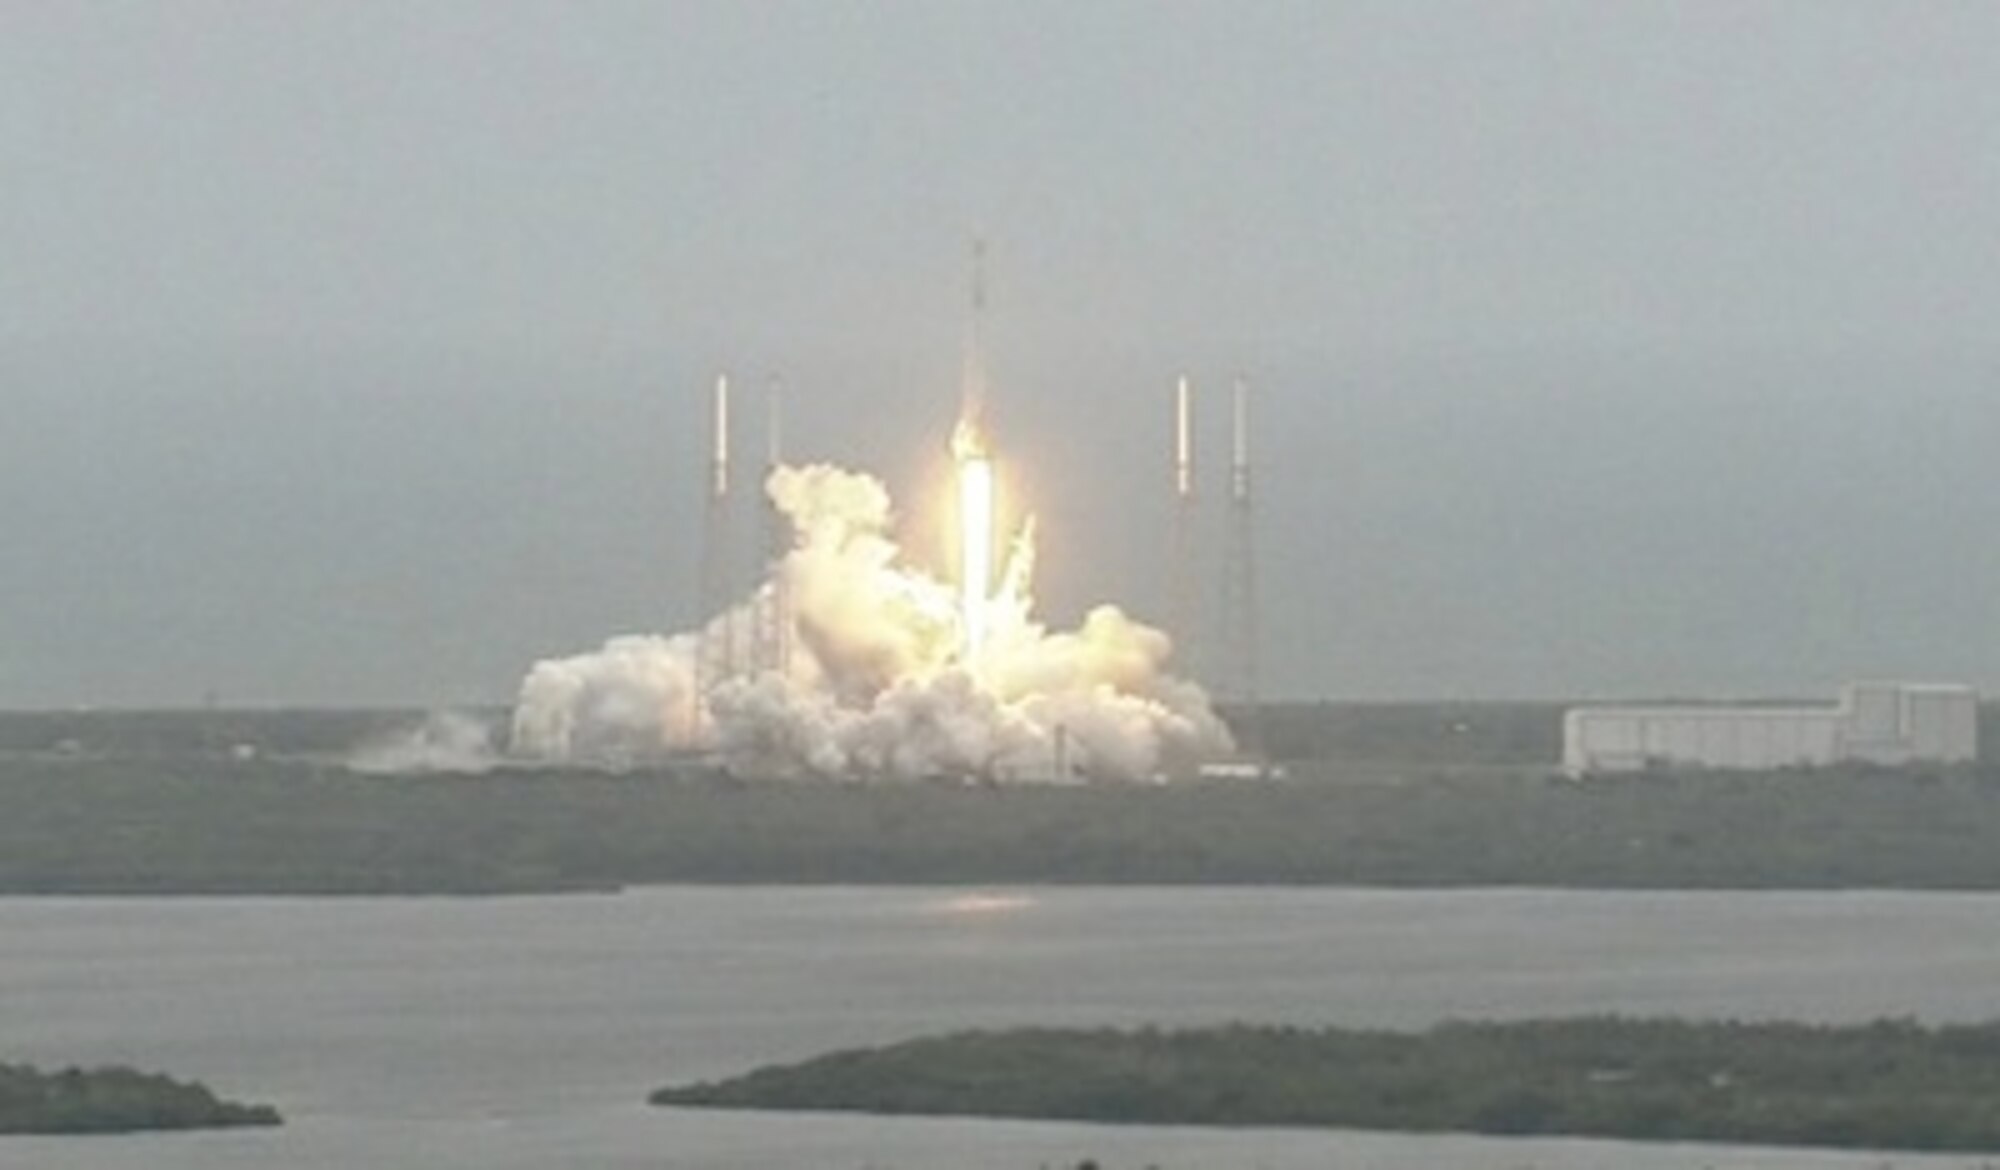 The SpaceX Falcon 9 rocket successfully launched from Cape Canaveral Air Force Station, Fla. at 3:25 p.m. April 18, 2014. Over the next three days the final stage will undergo a series of carefully choreographed burns which will allow the Dragon (CRS-3) capsule to reach the International Space Station Easter Sunday. (Courtesy photo/Stephen Clark/SpaceflightNow) 